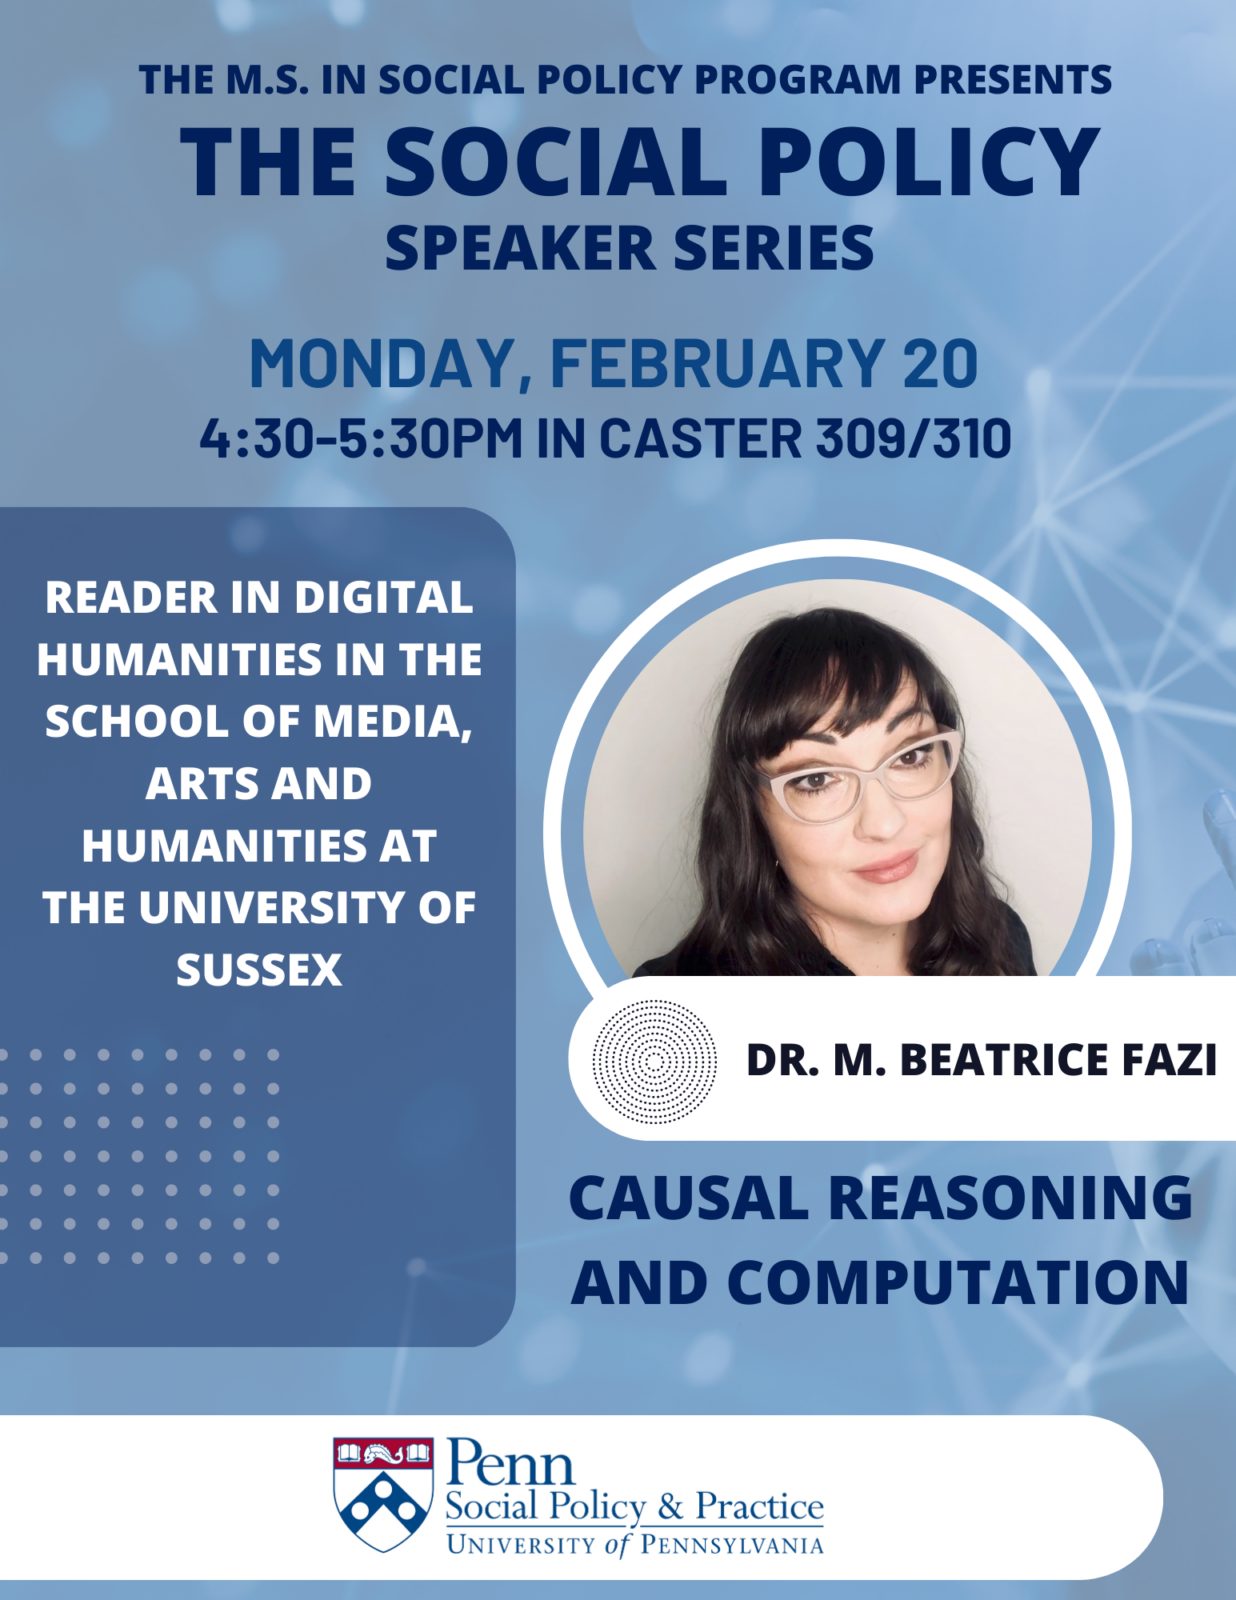 Flyer for Social Policy Speaker Series Dr. Beatrice Fazi